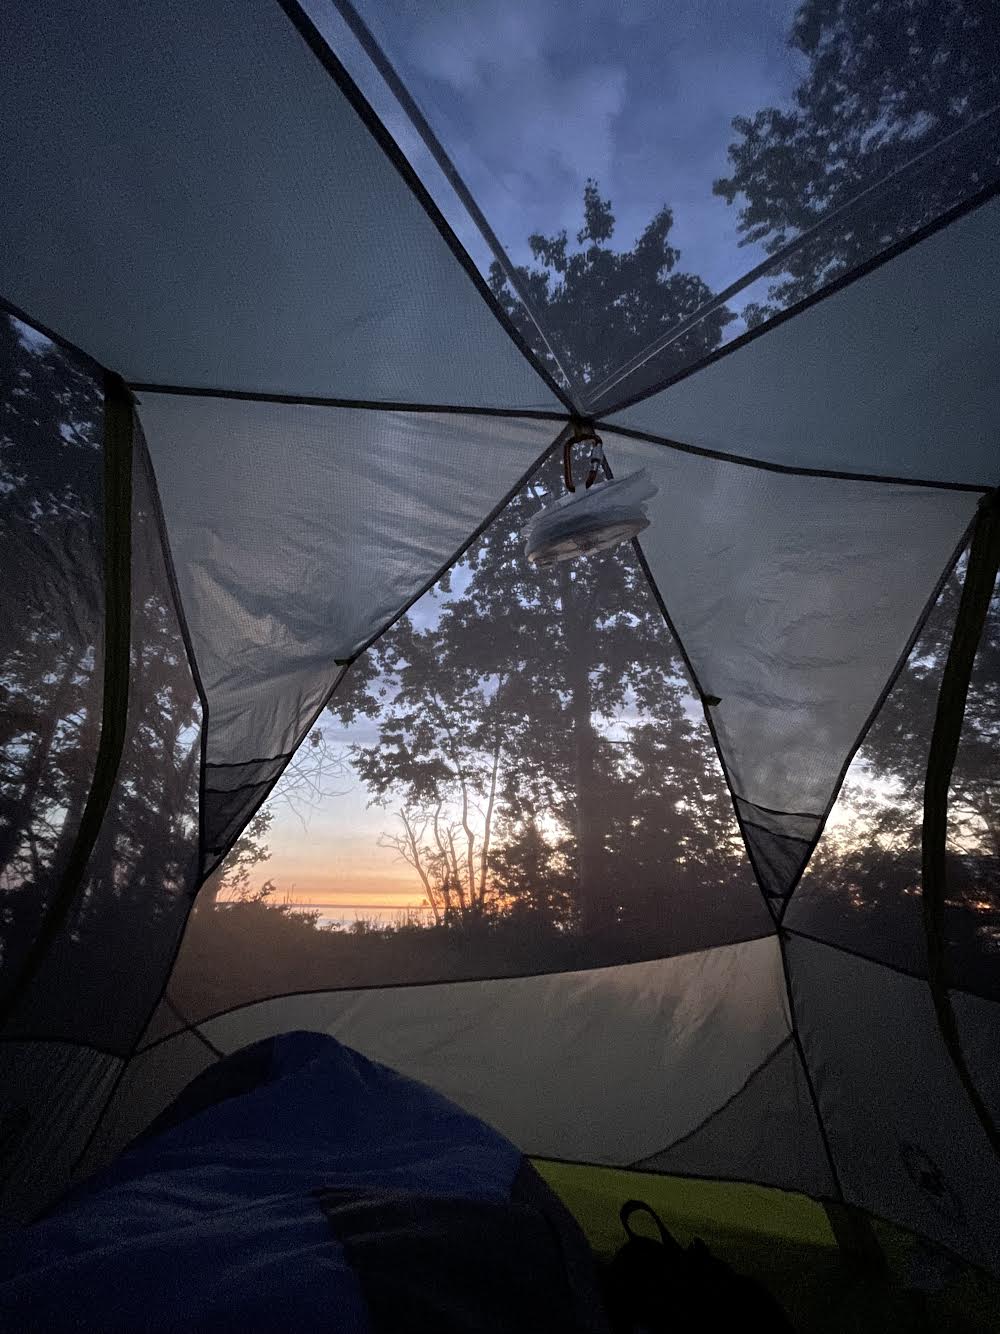 Take in beautiful sunrises from the comfort of your own tent 